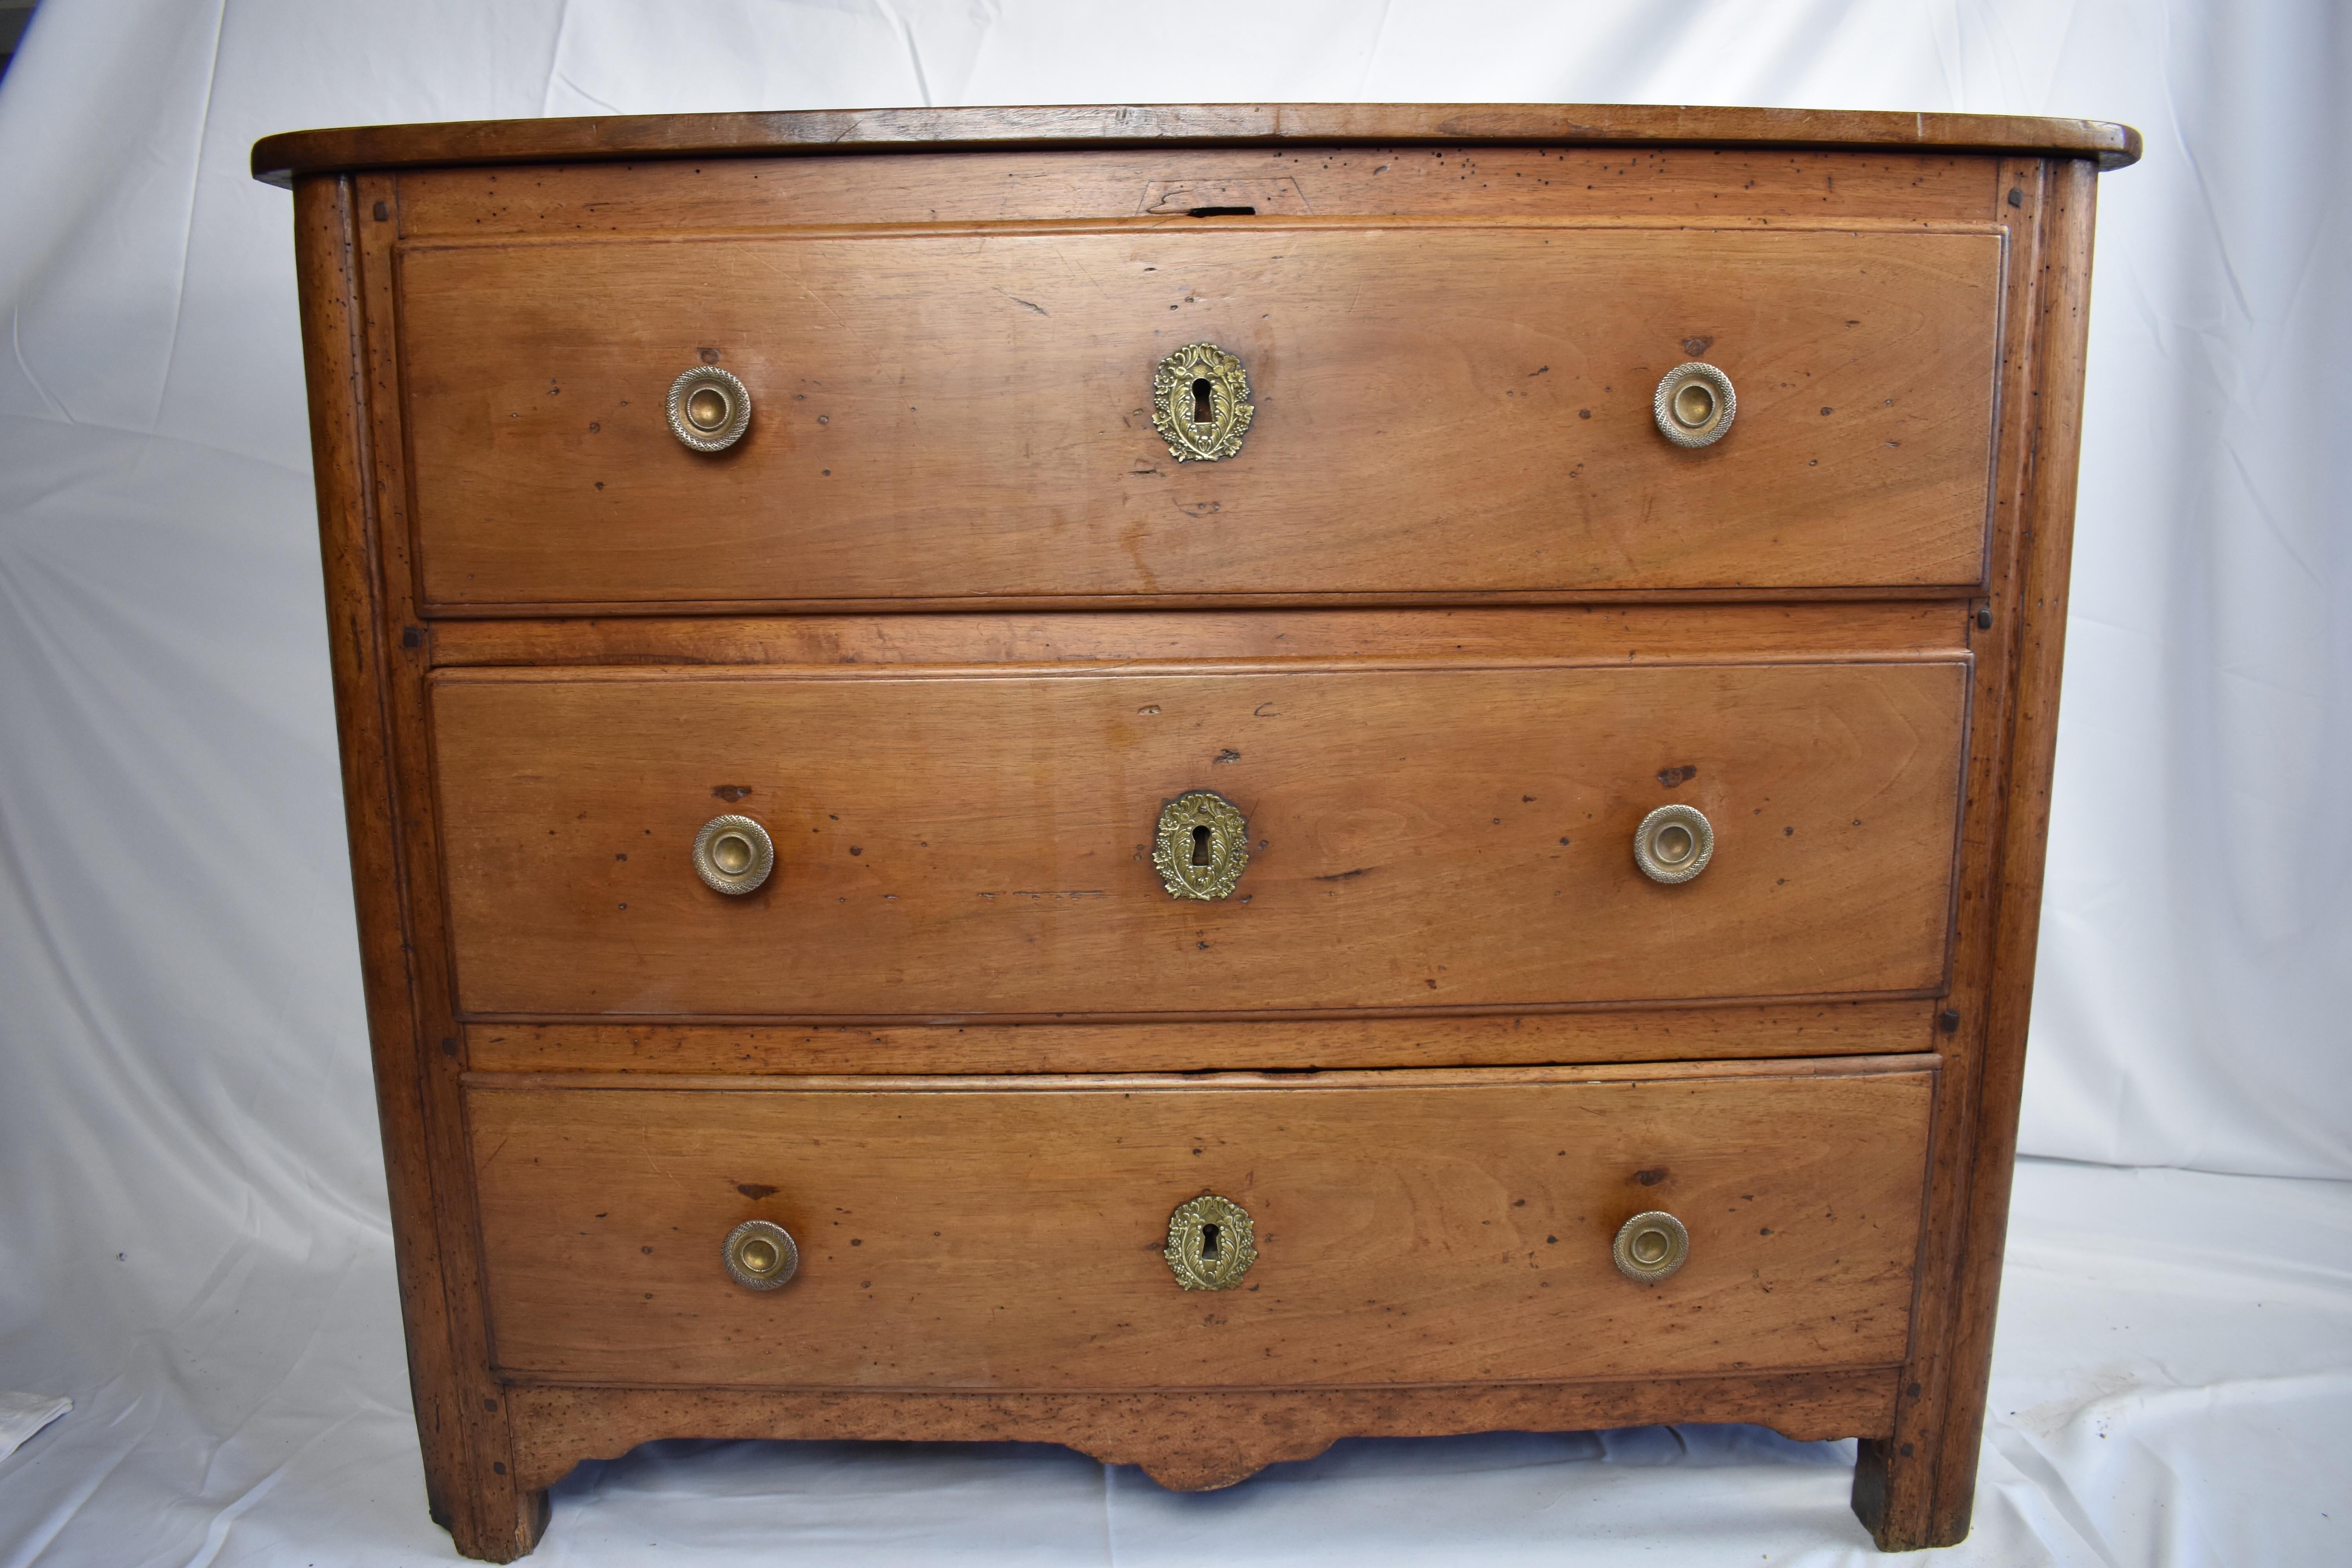 This is a beautiful period piece, built using pegged construction, walnut and oak secondary. This little guy is sturdy, and roomy. The commode still sits on its original feet, however, the hardware was changed at some point in the past. The drawers